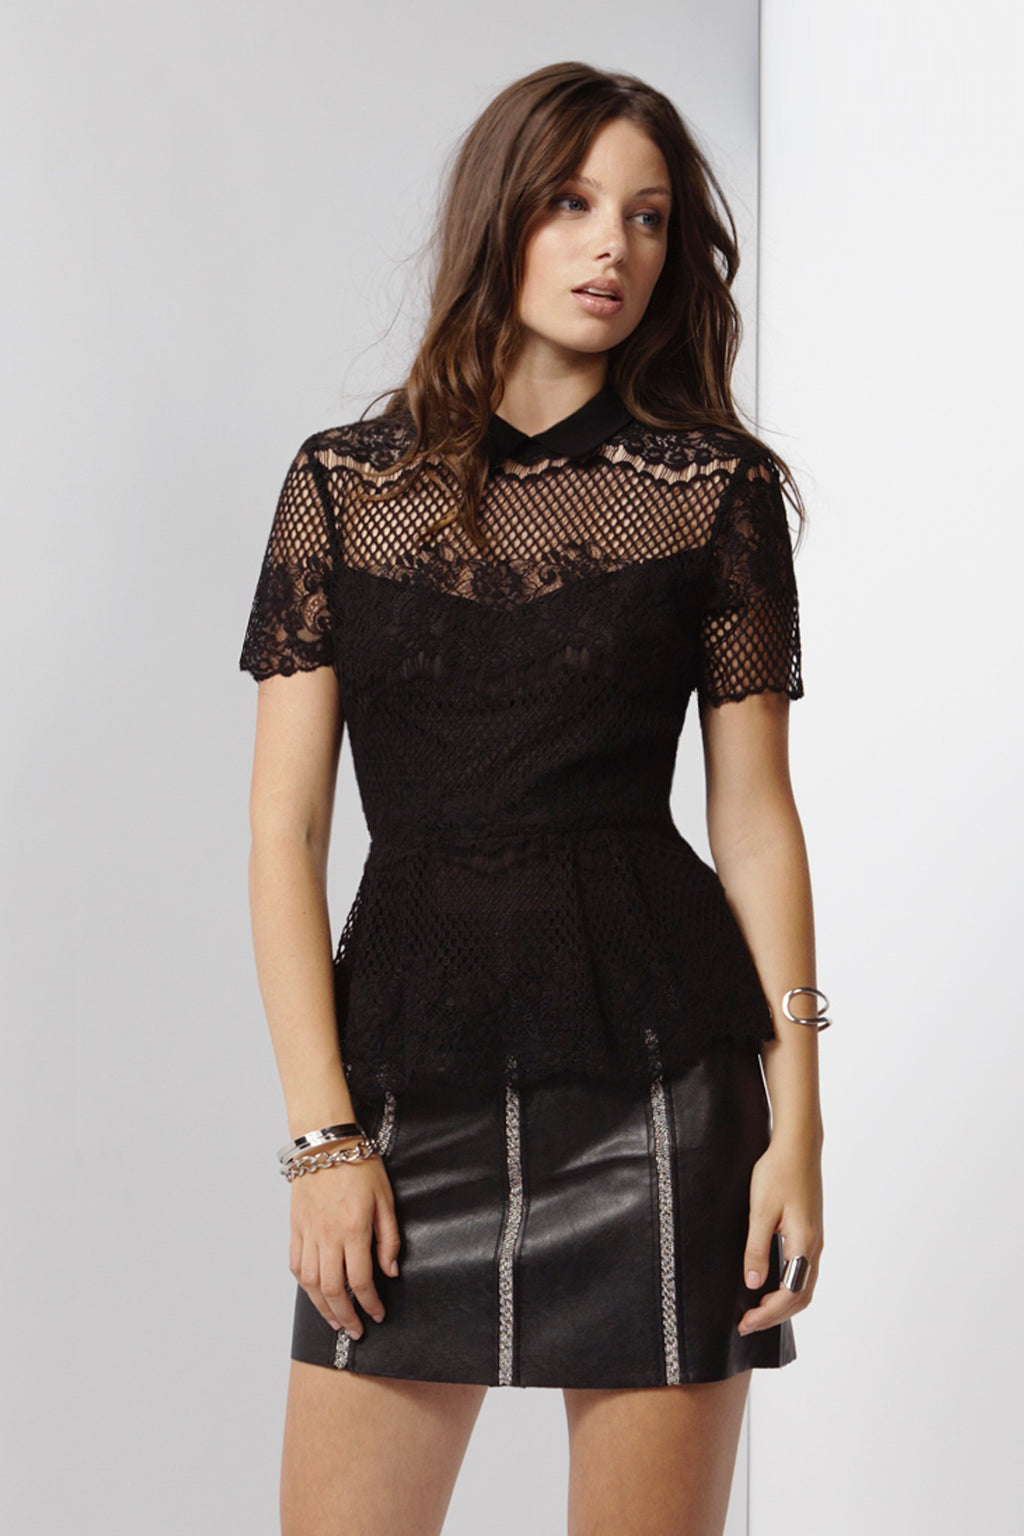 Black Lace Peplum Texted Top 